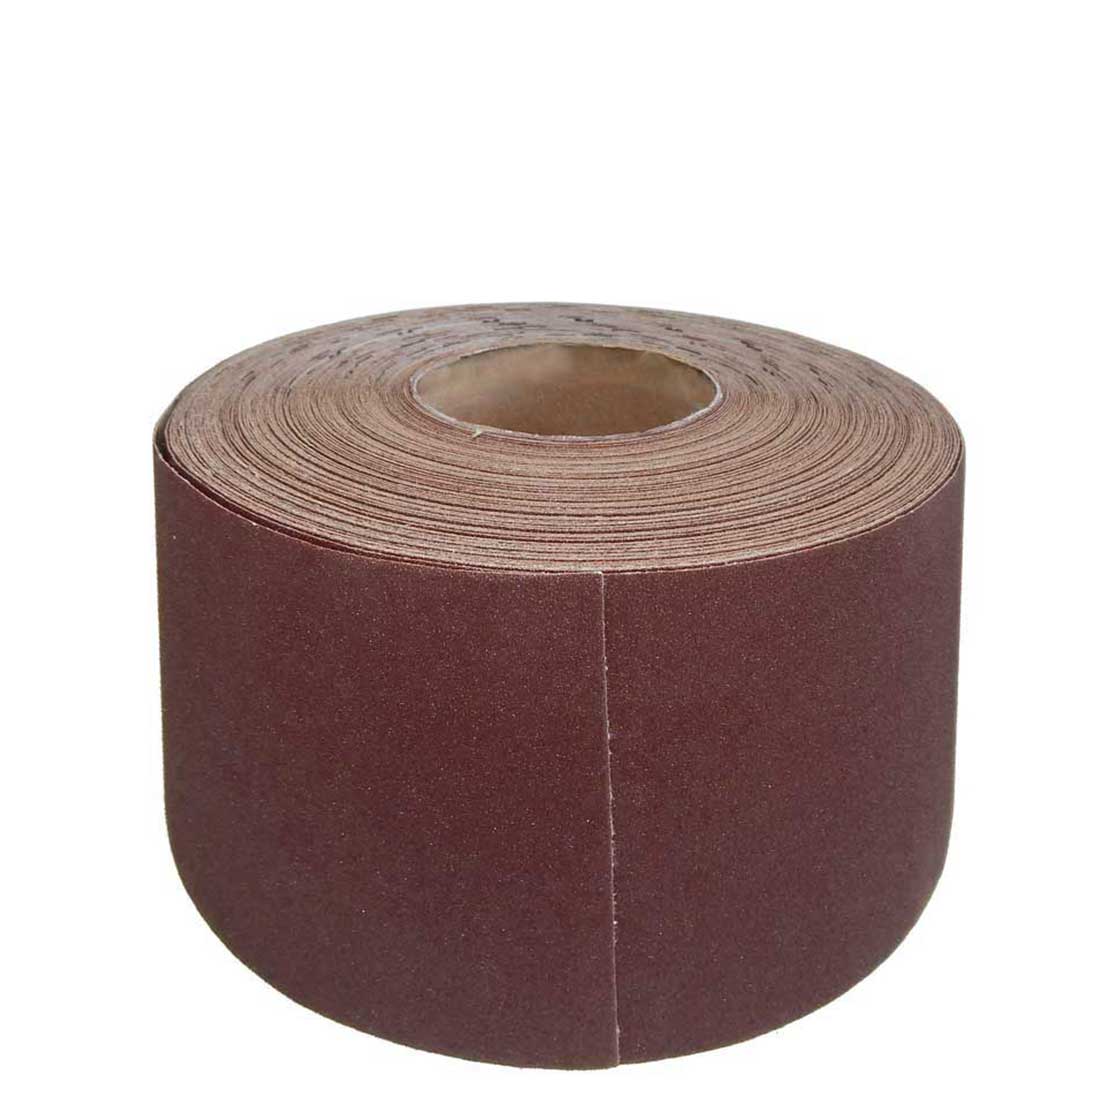 MioTools sanding paper roll for hand sanders, G40–240, 115 mm x 50 m / aluminium oxide